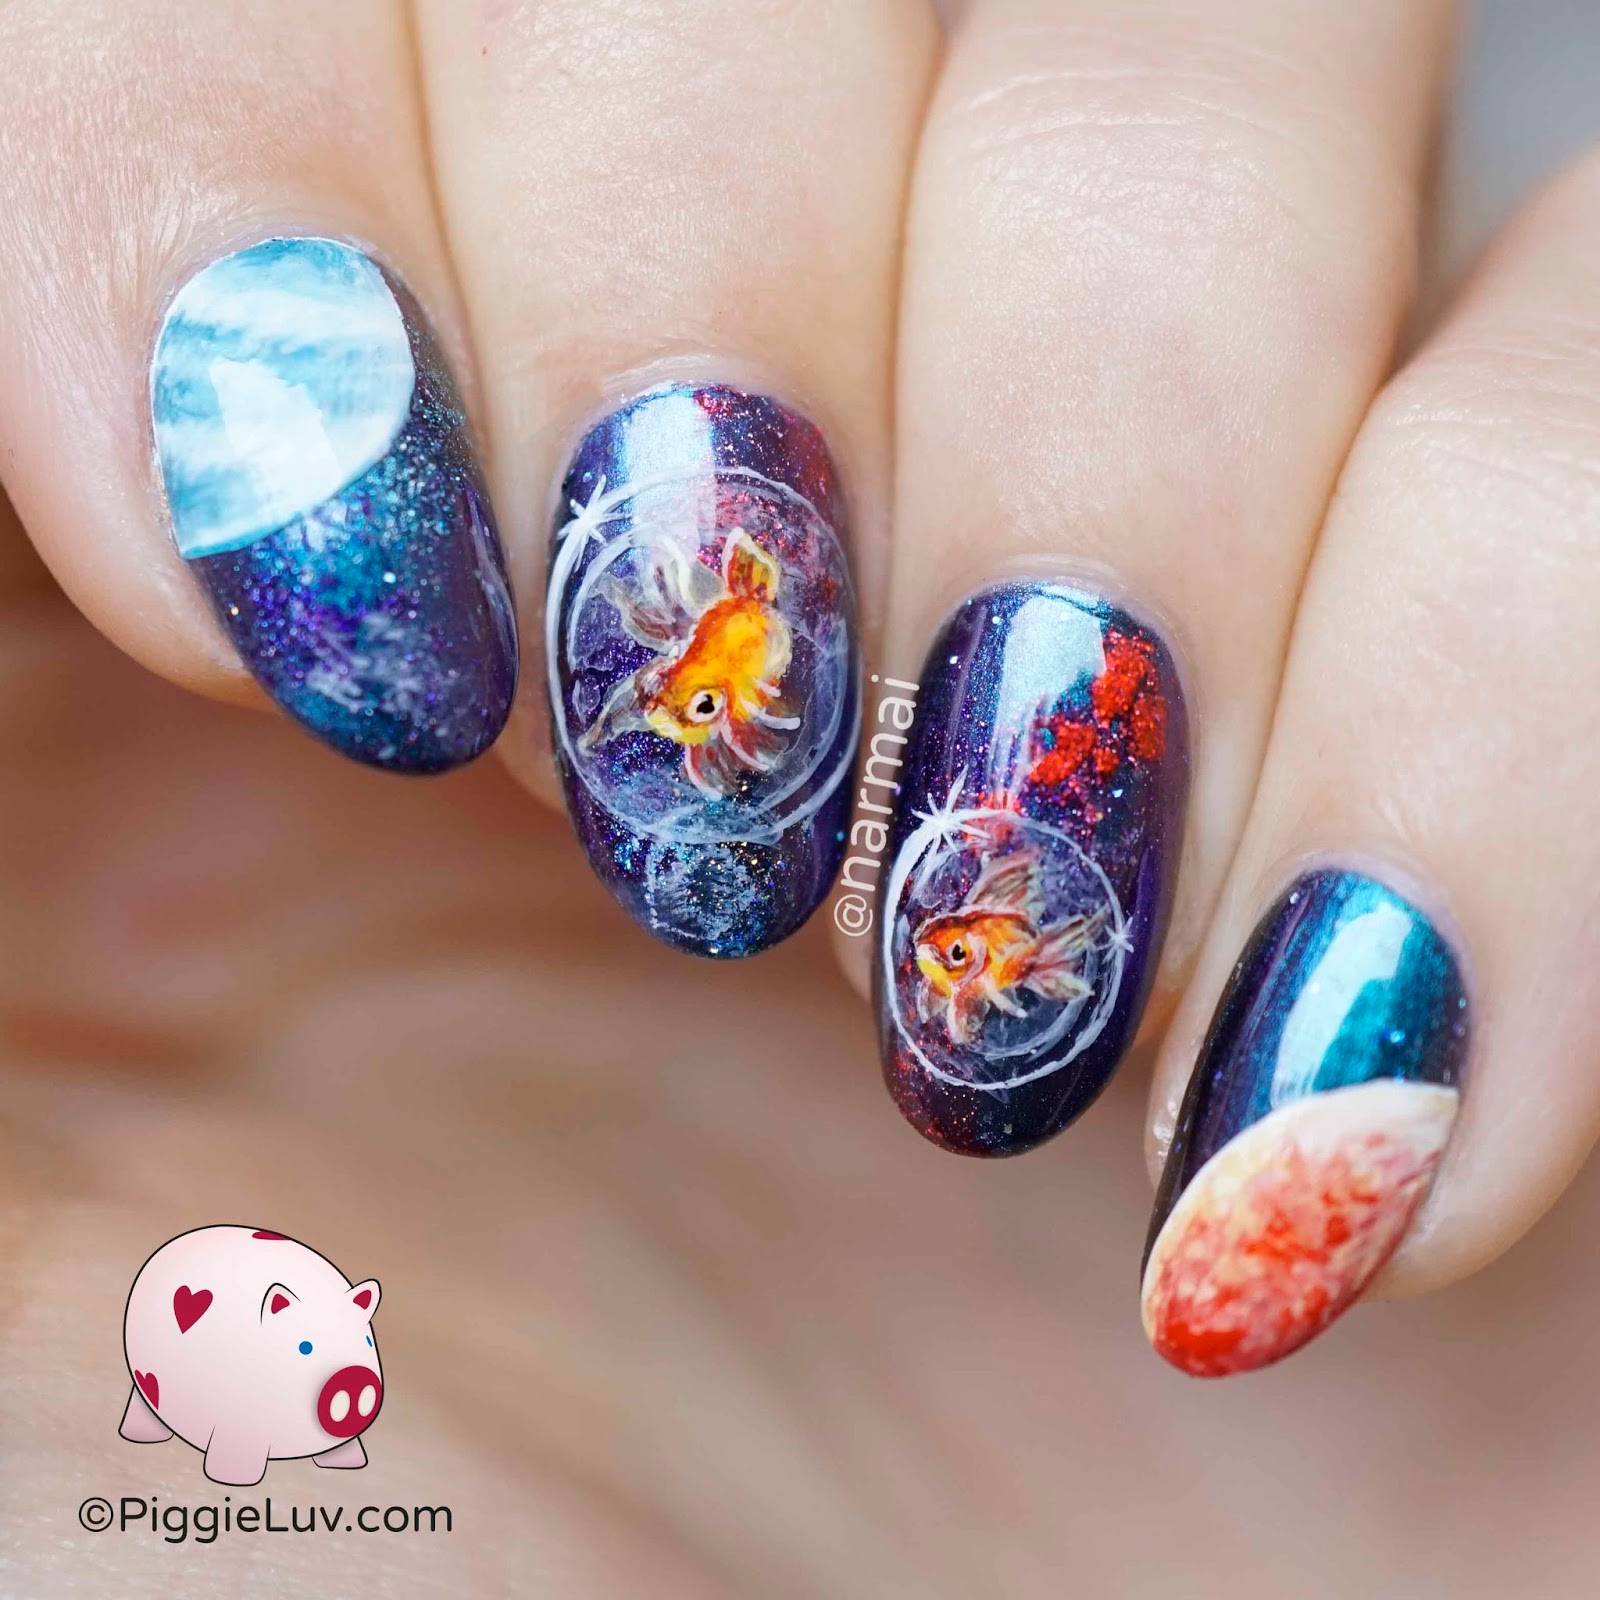 Amazon.com : Goldfish Nail Decals : Beauty & Personal Care